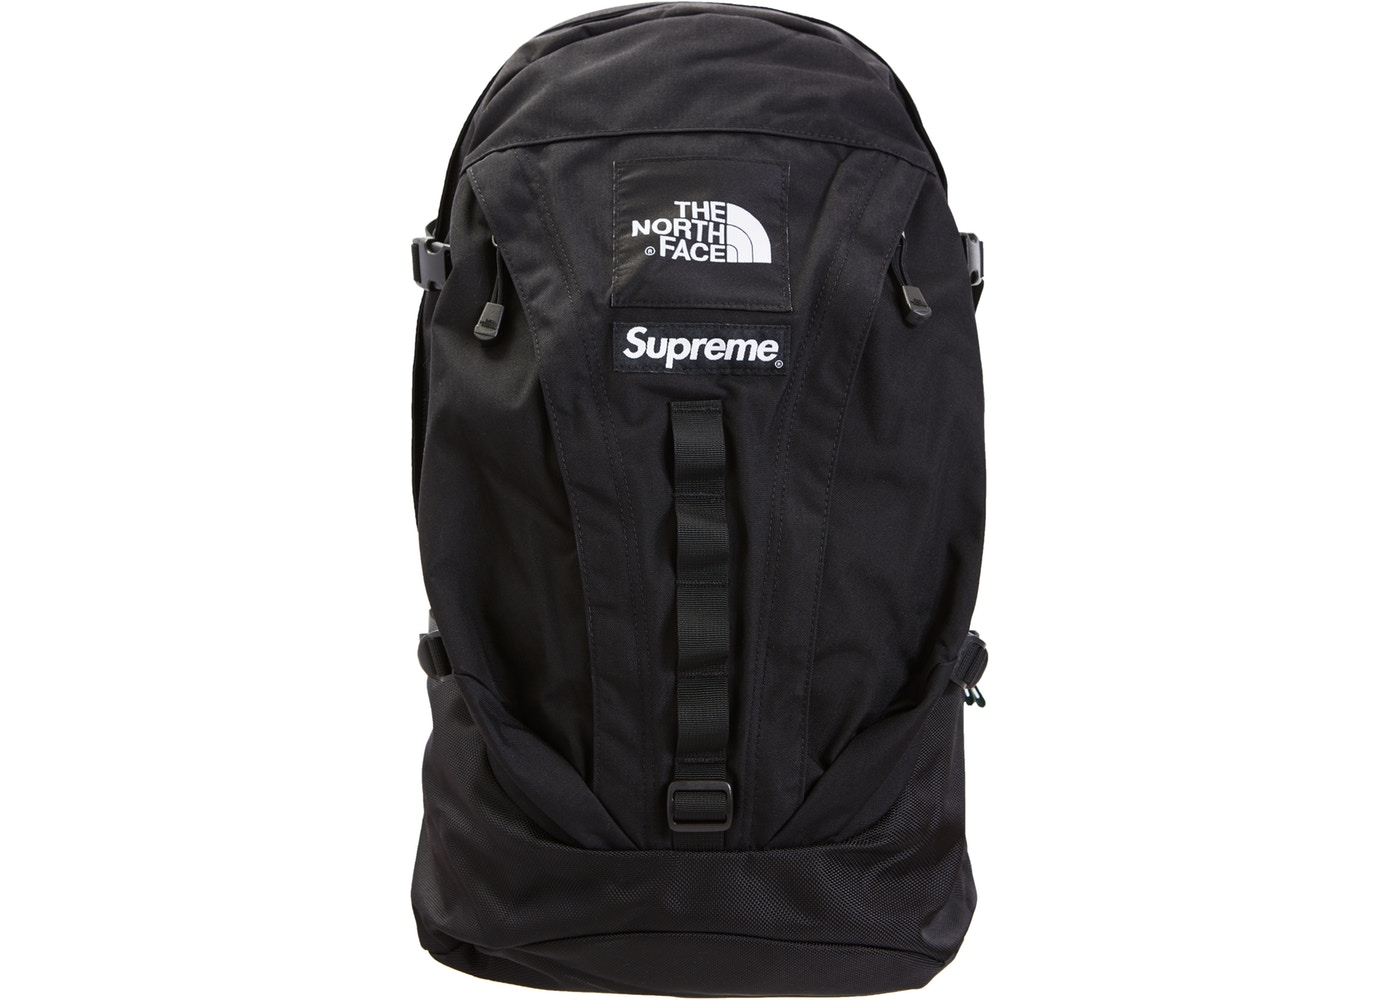 Supreme north face expedition backpack | www.fleettracktz.com